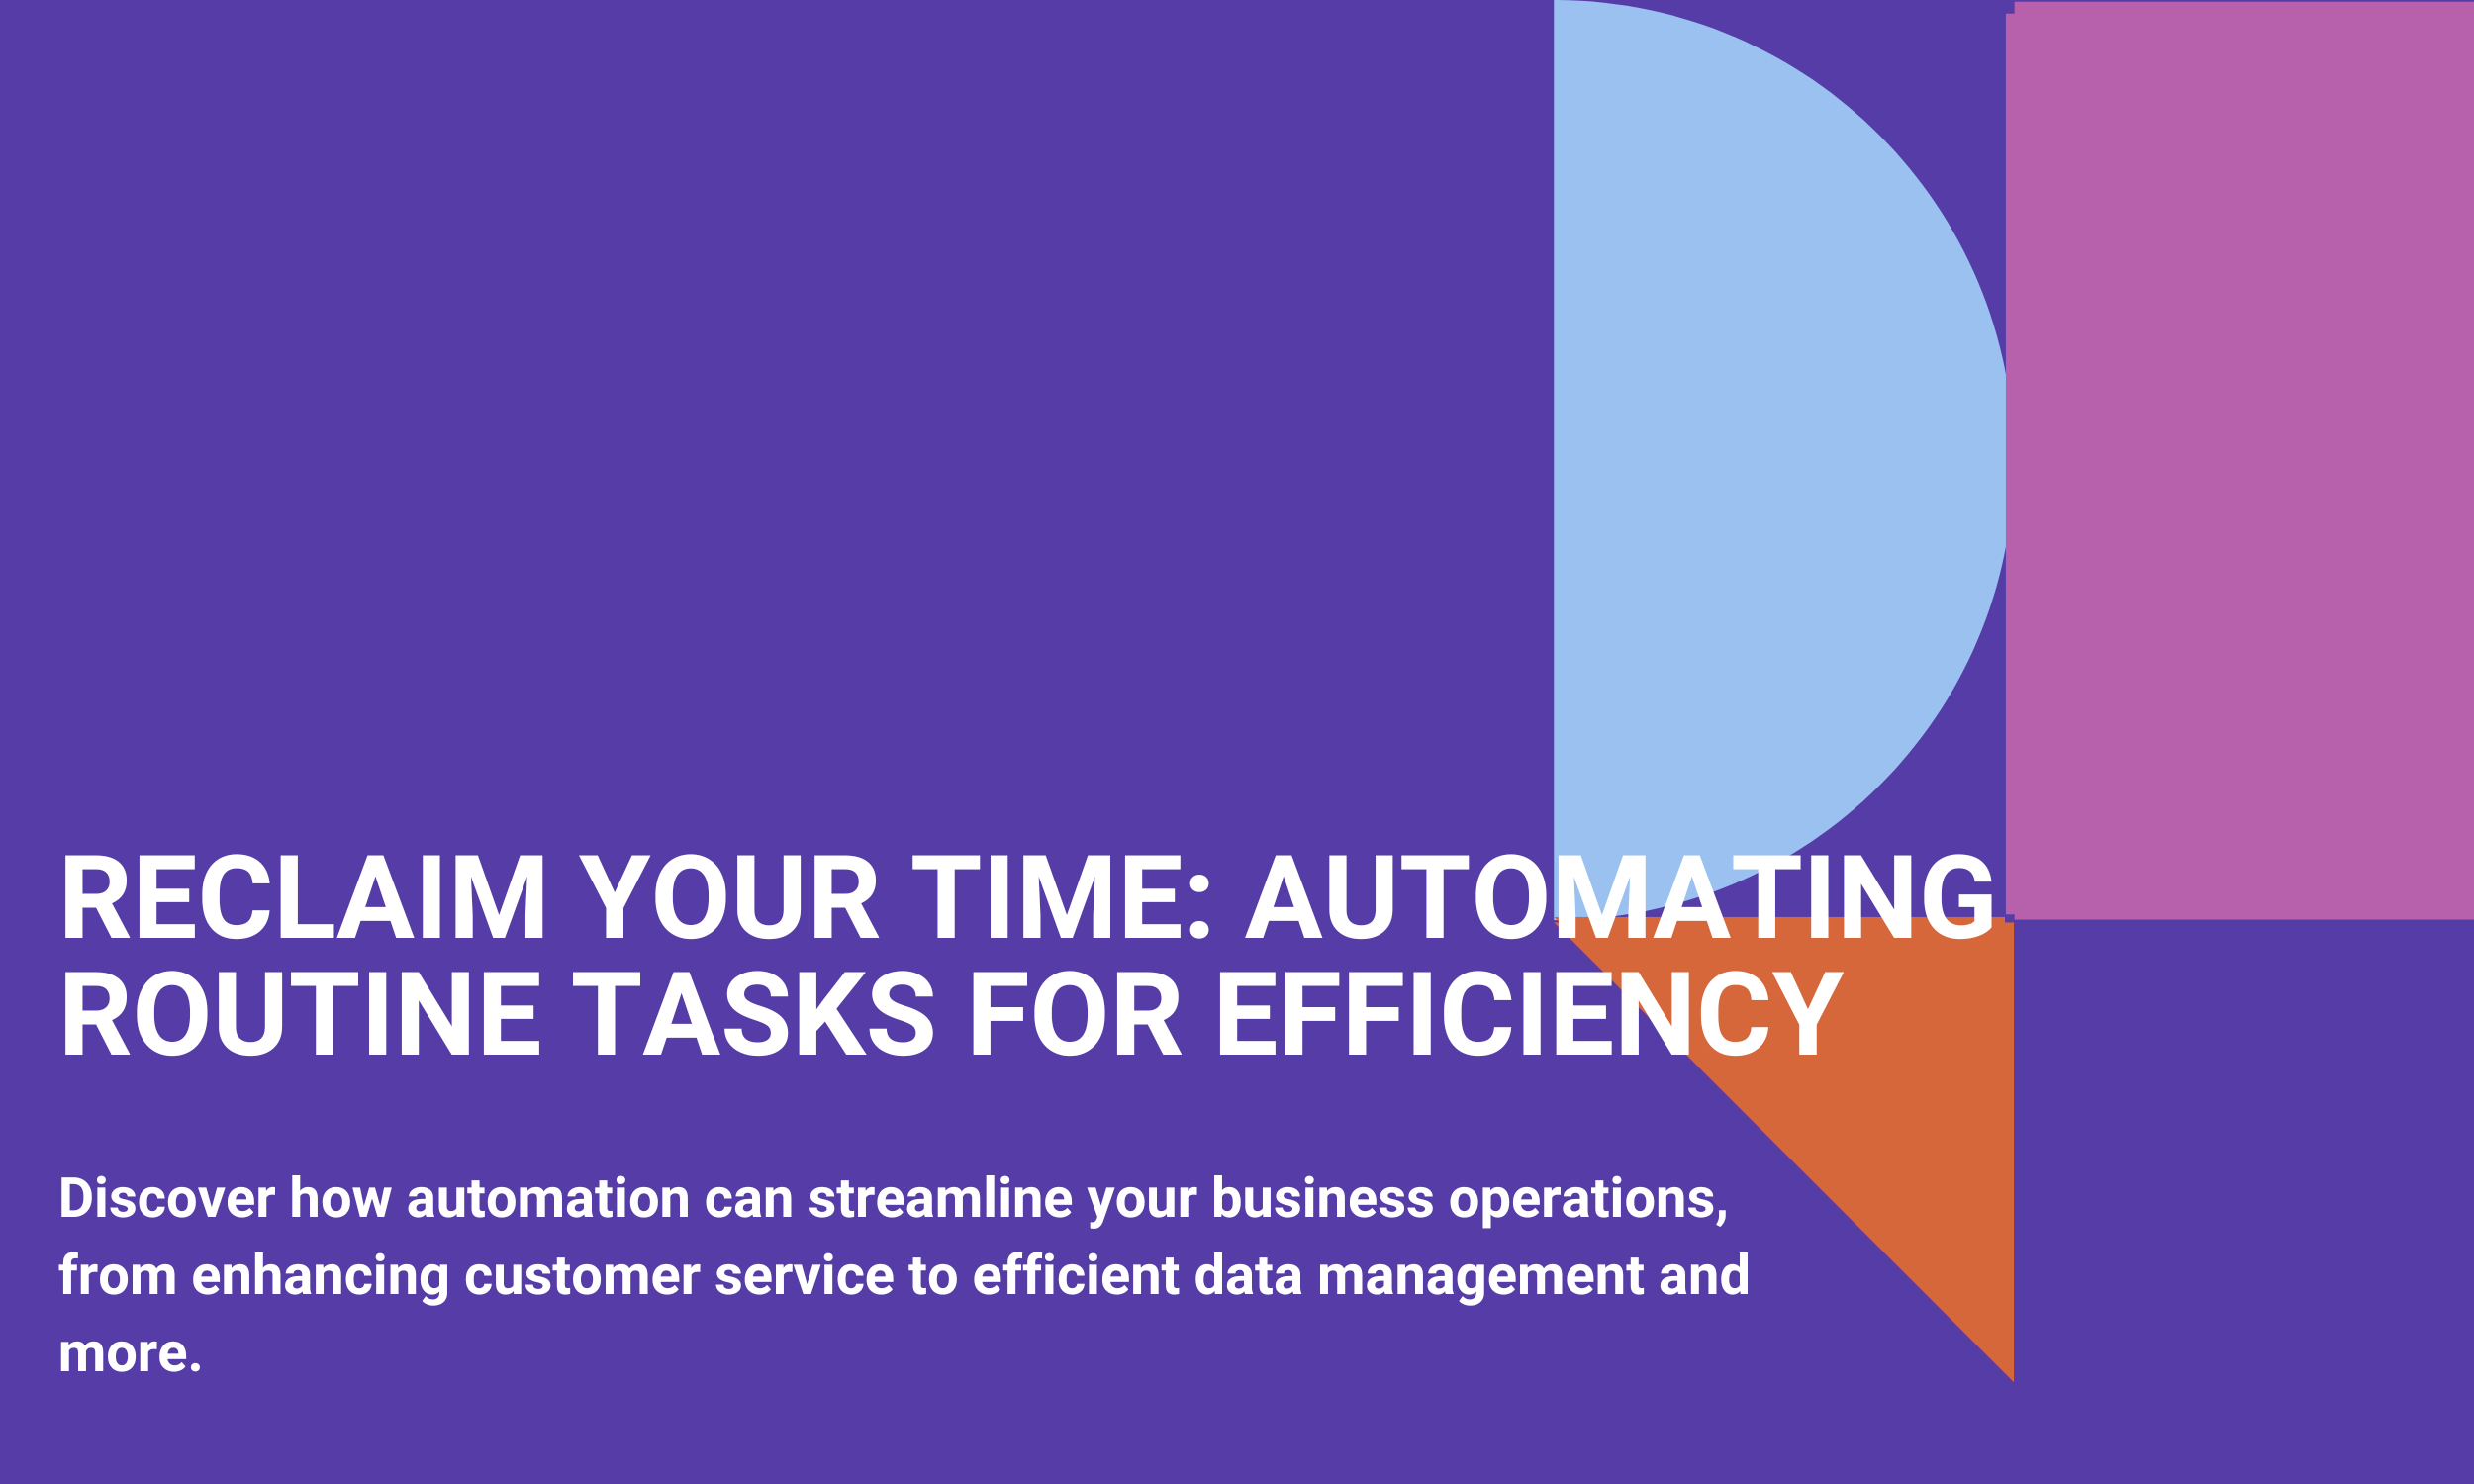 Reclaim Your Time: Automating Routine Tasks for Efficiency